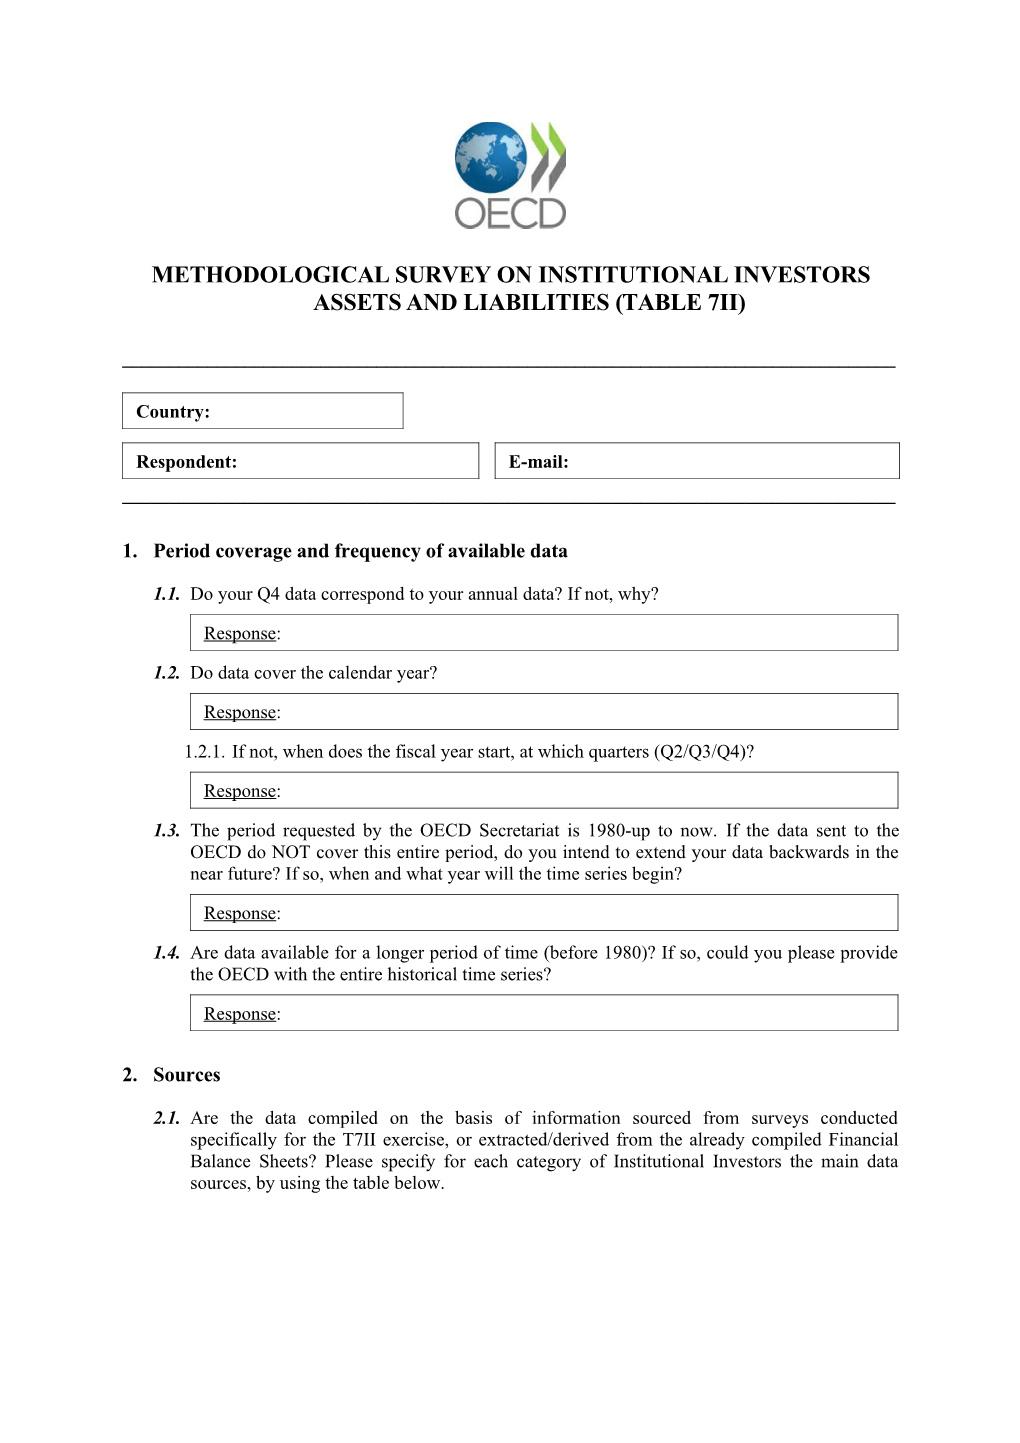 Methodological Survey on Institutional Investors ASSETS and LIABILITIES (TABLE 7II)